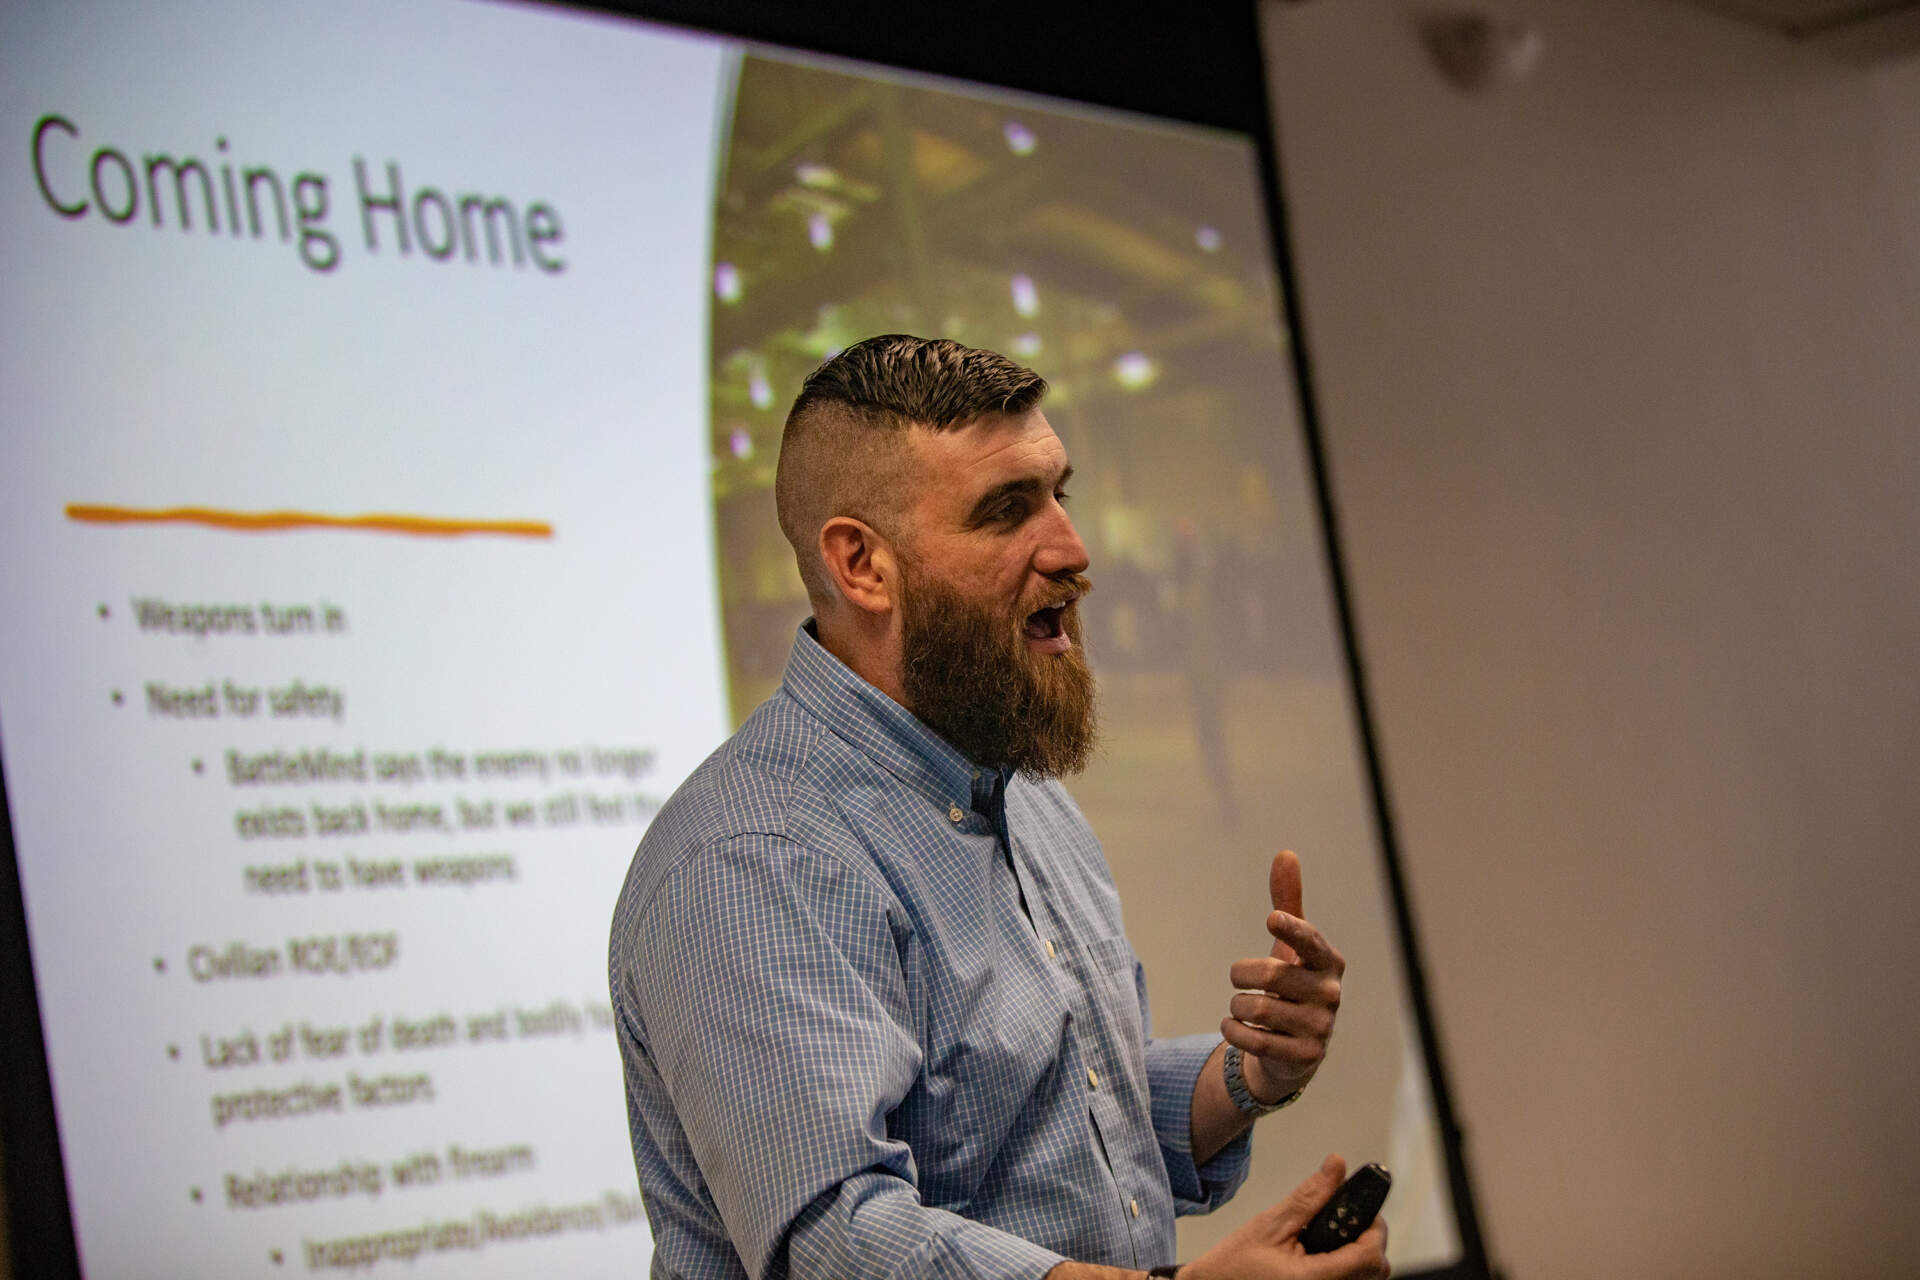 Instructor Kevin Lambert, who is a psychology student at William James College, served in the Army and did a tour in Iraq, discusses military and veteran firearm culture. (Jesse Costa/WBUR)